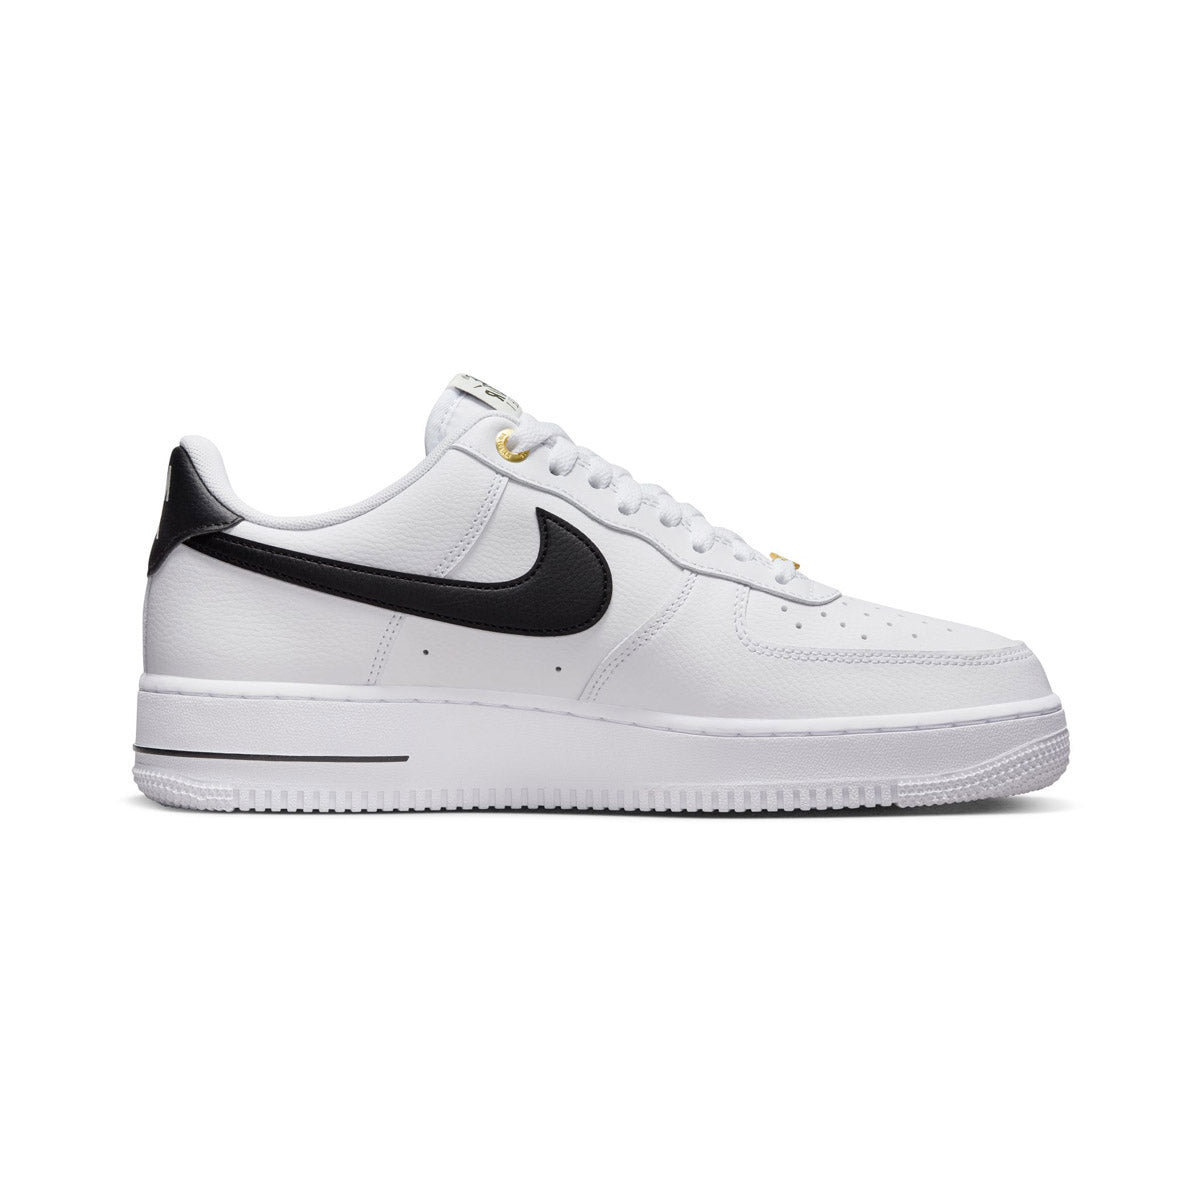 Buy Nike Mens Air Force 1 07 LV8 DQ7658 100 White/Black - Size 15, Blue  Chill Blue Chill White, 15 at